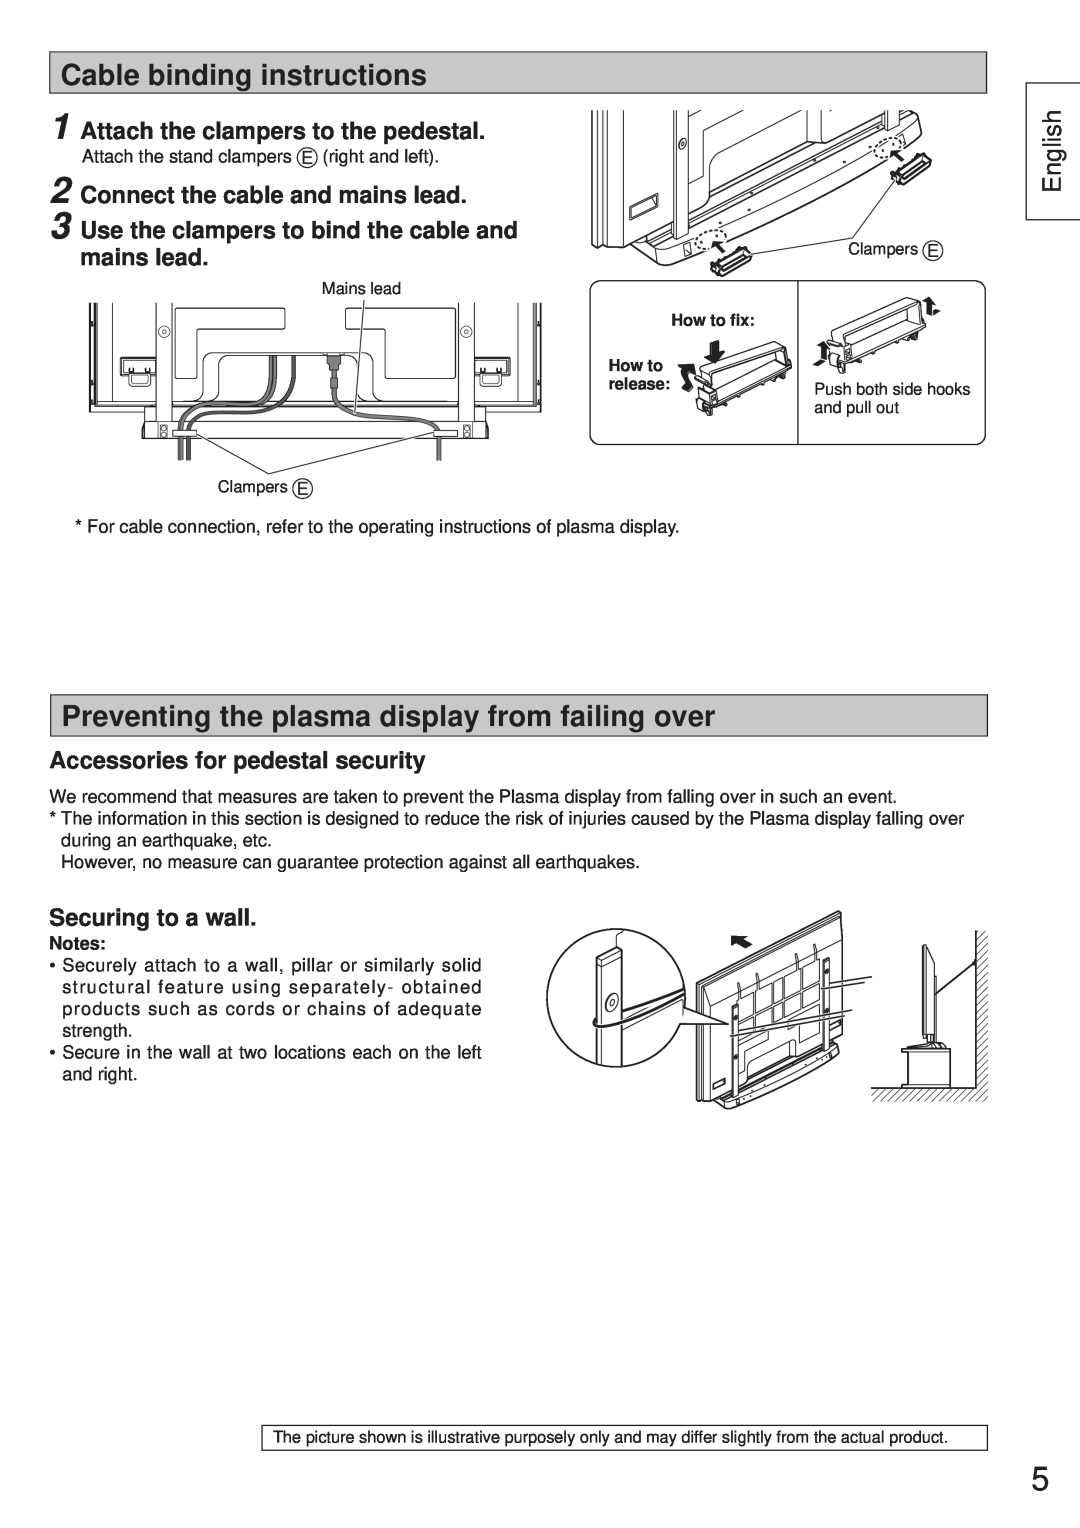 Panasonic TY-ST65VX100 Cable binding instructions, Preventing the plasma display from failing over, Securing to a wall 